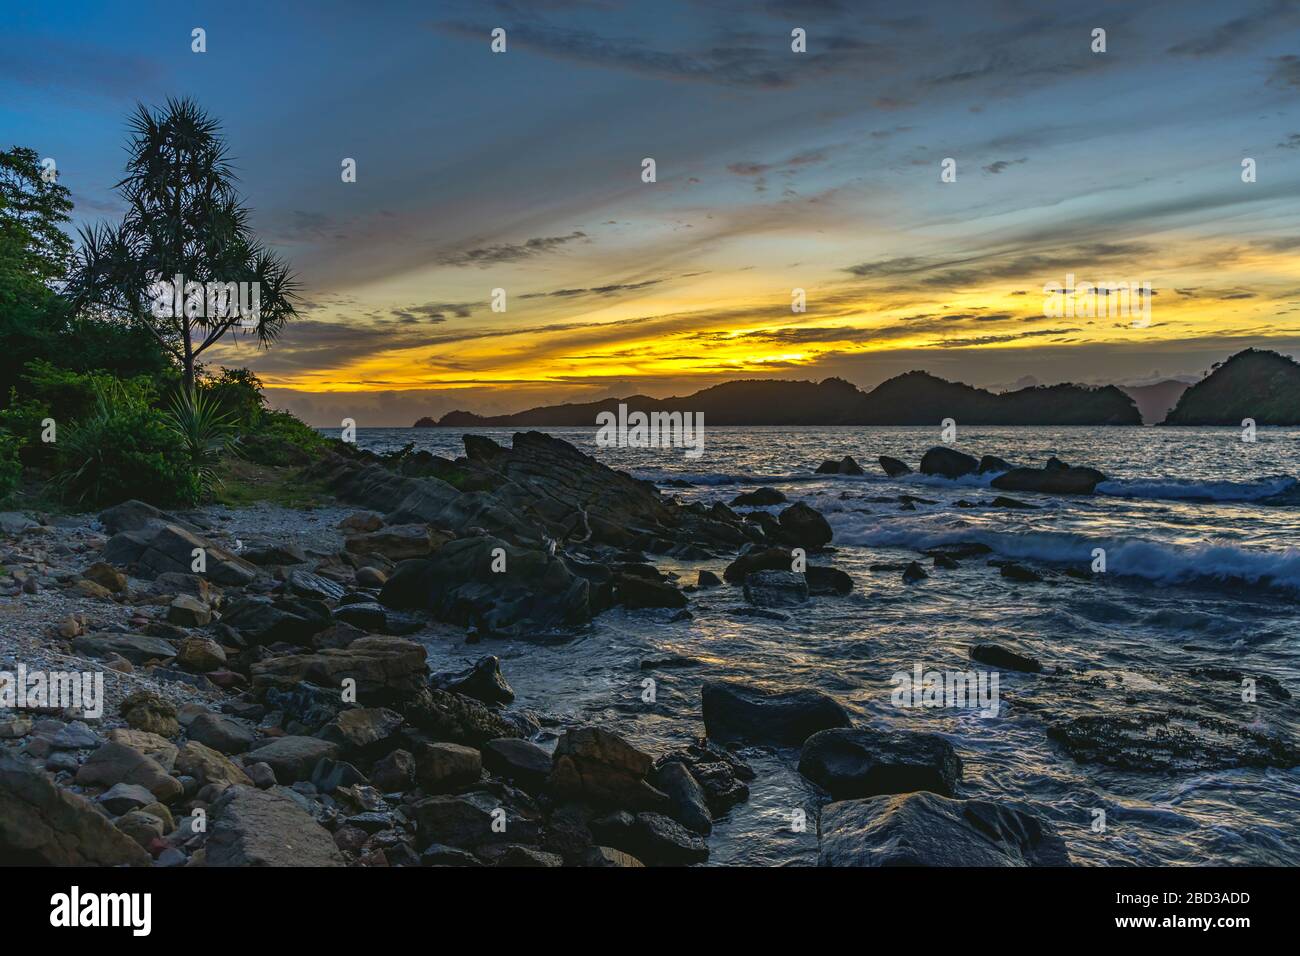 Undiscovered remote beach in the evening. Good for camping or swimming or just enjoying nature Stock Photo